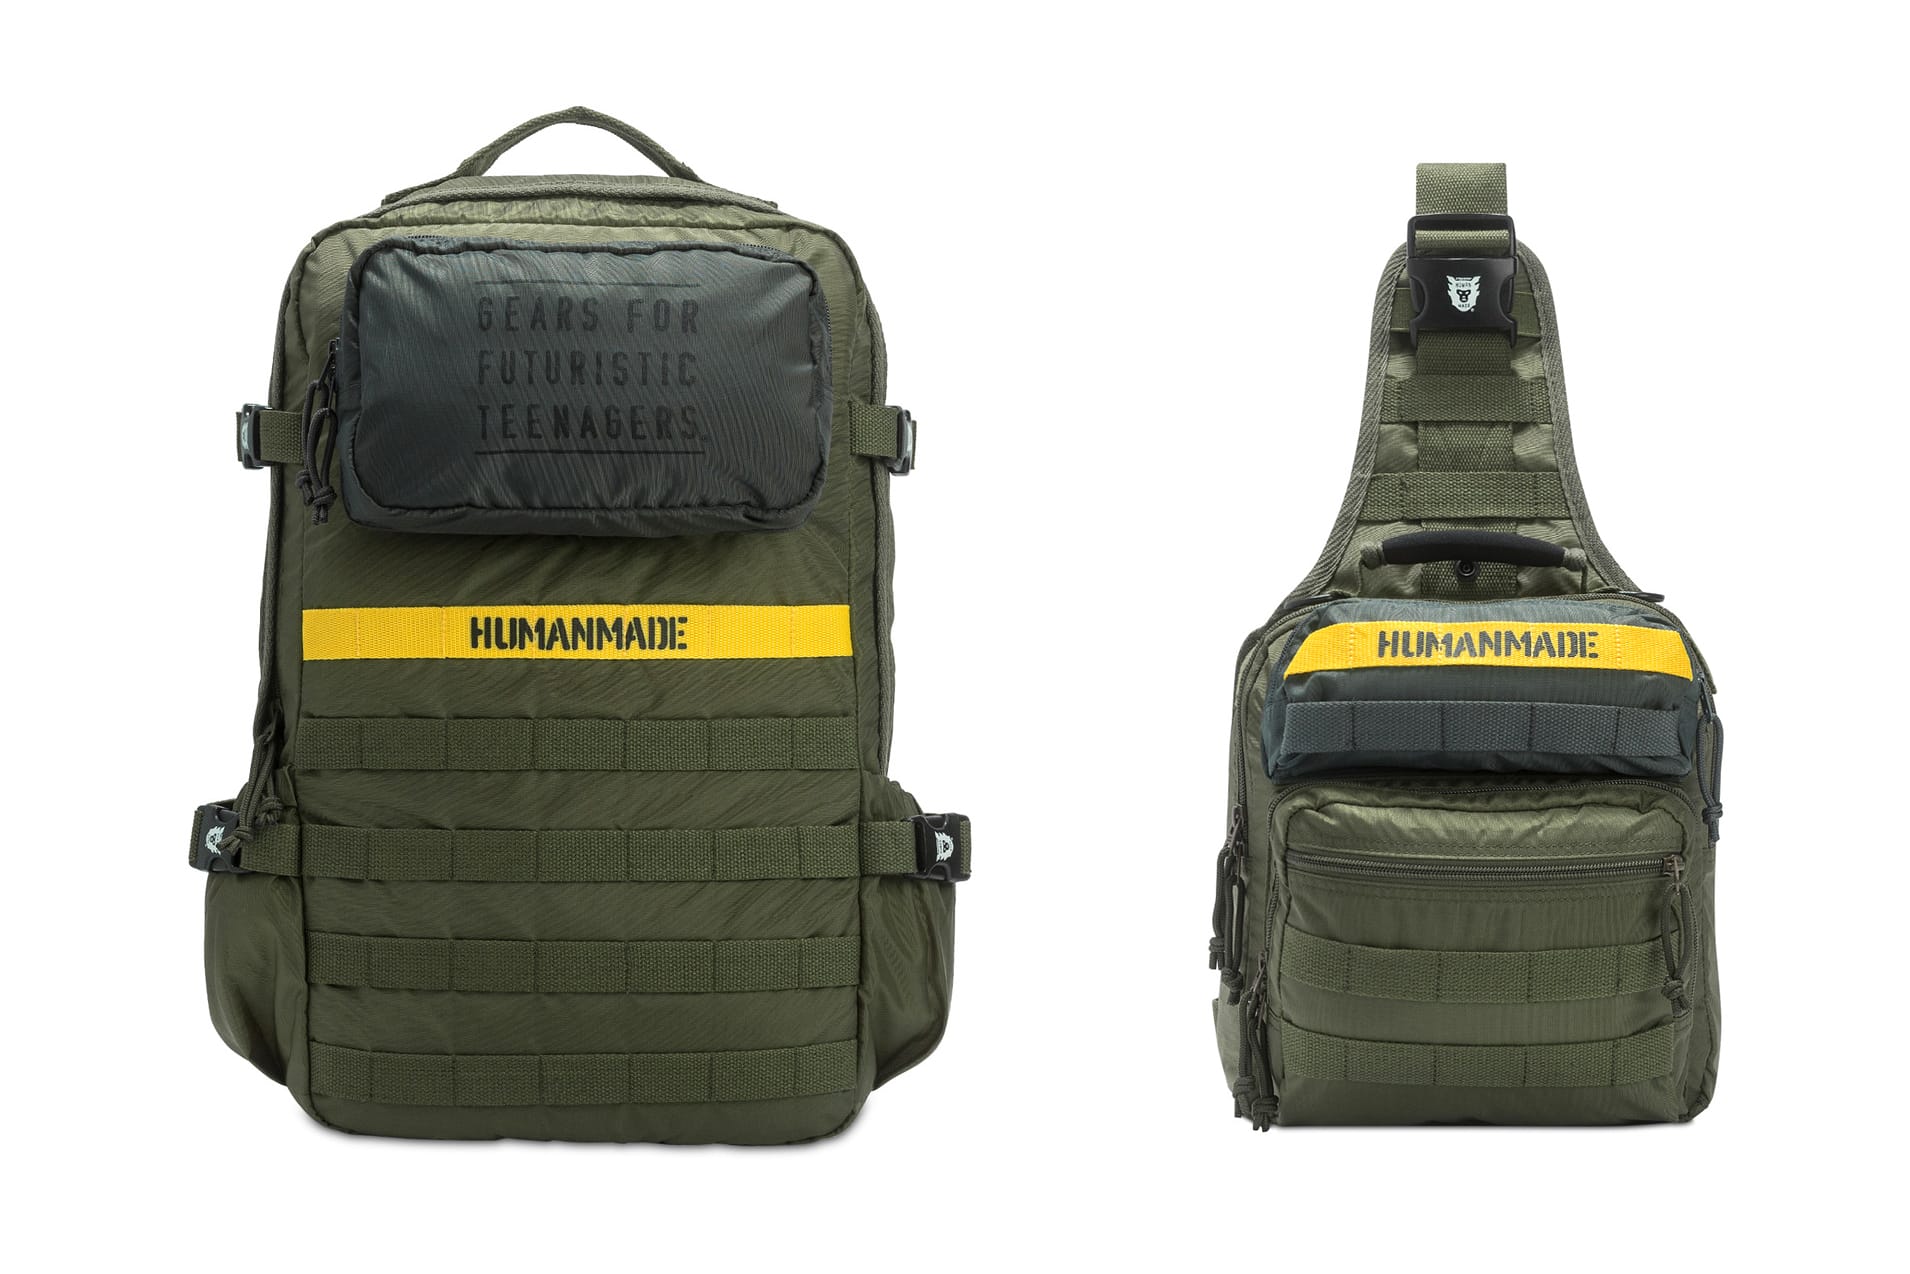 HUMAN MADE MILITARY RUCKSACK バッグ バックパック